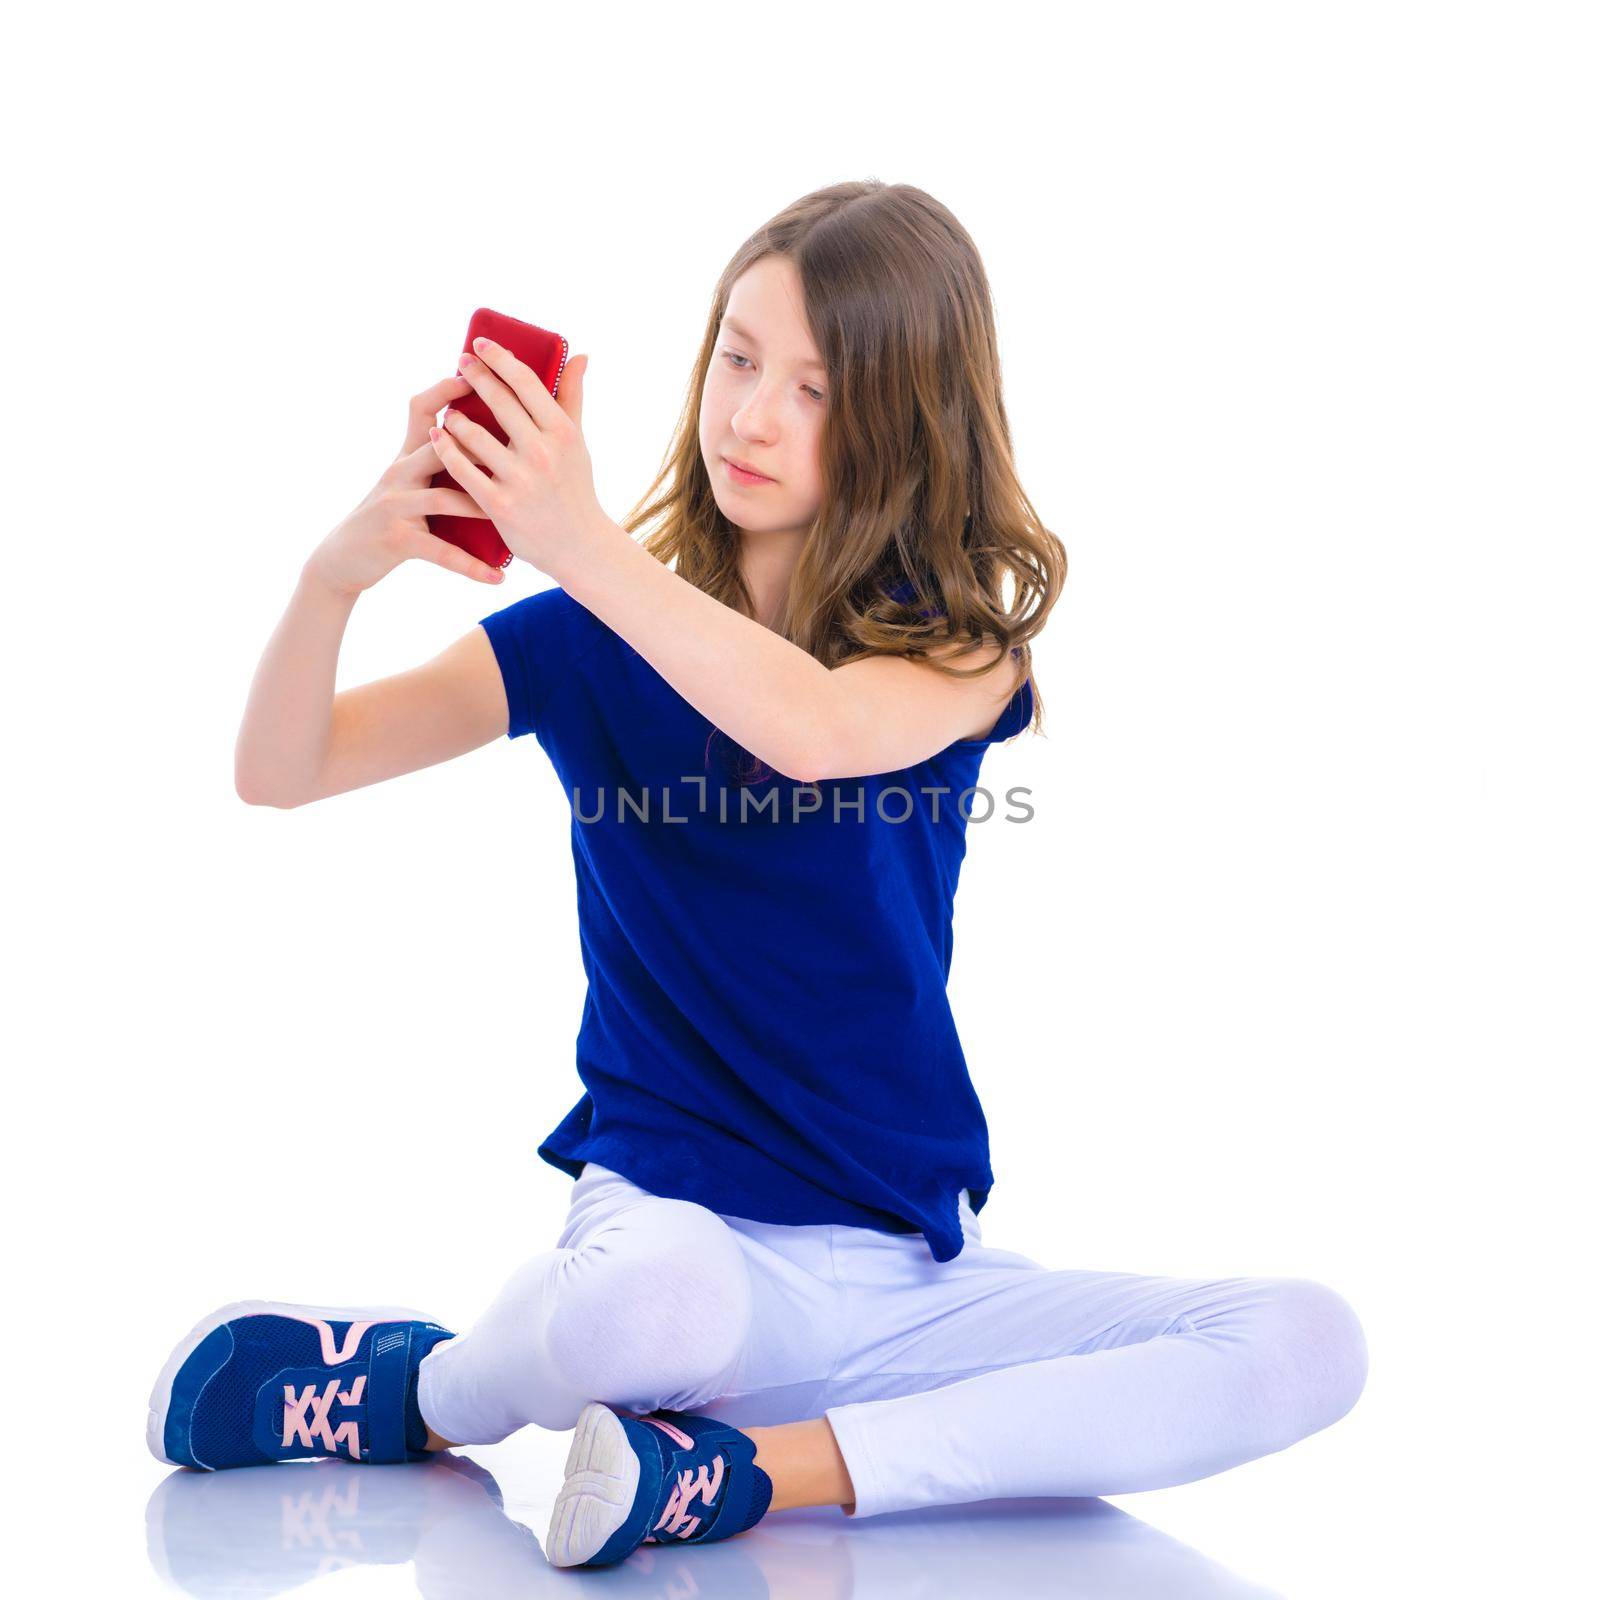 Happy smiling little girl making self-portrait on smartphone. The concept of people and technology. Isolated on white background.